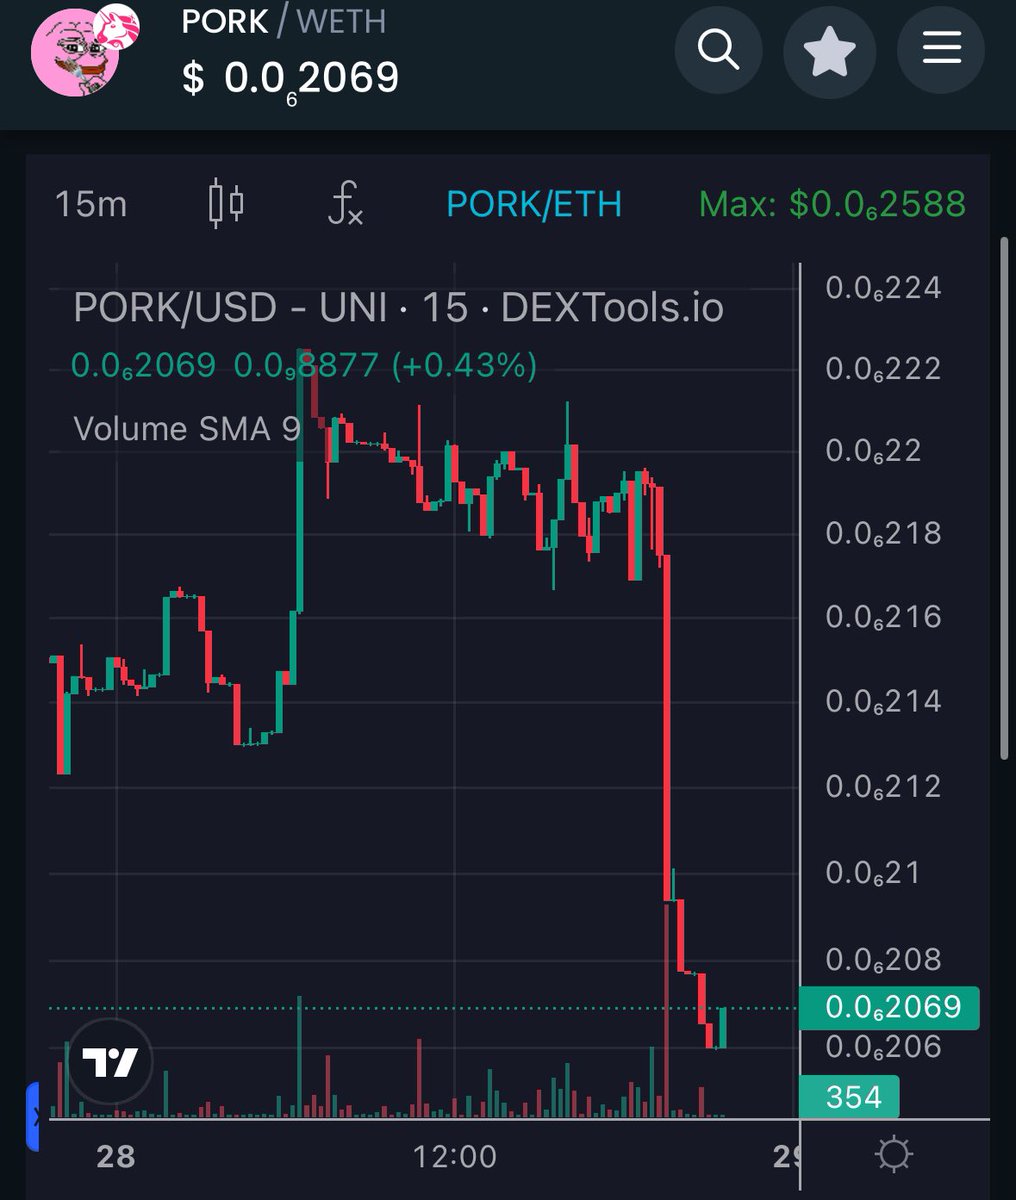 Did Kenobi exited the room? And sold all his $pork and $pndc? One by one, losses keep compounding due to the terrible execution, timing and leadership of this to amazing projects. What a paradox. @Pauly0x @hWonderofWorld